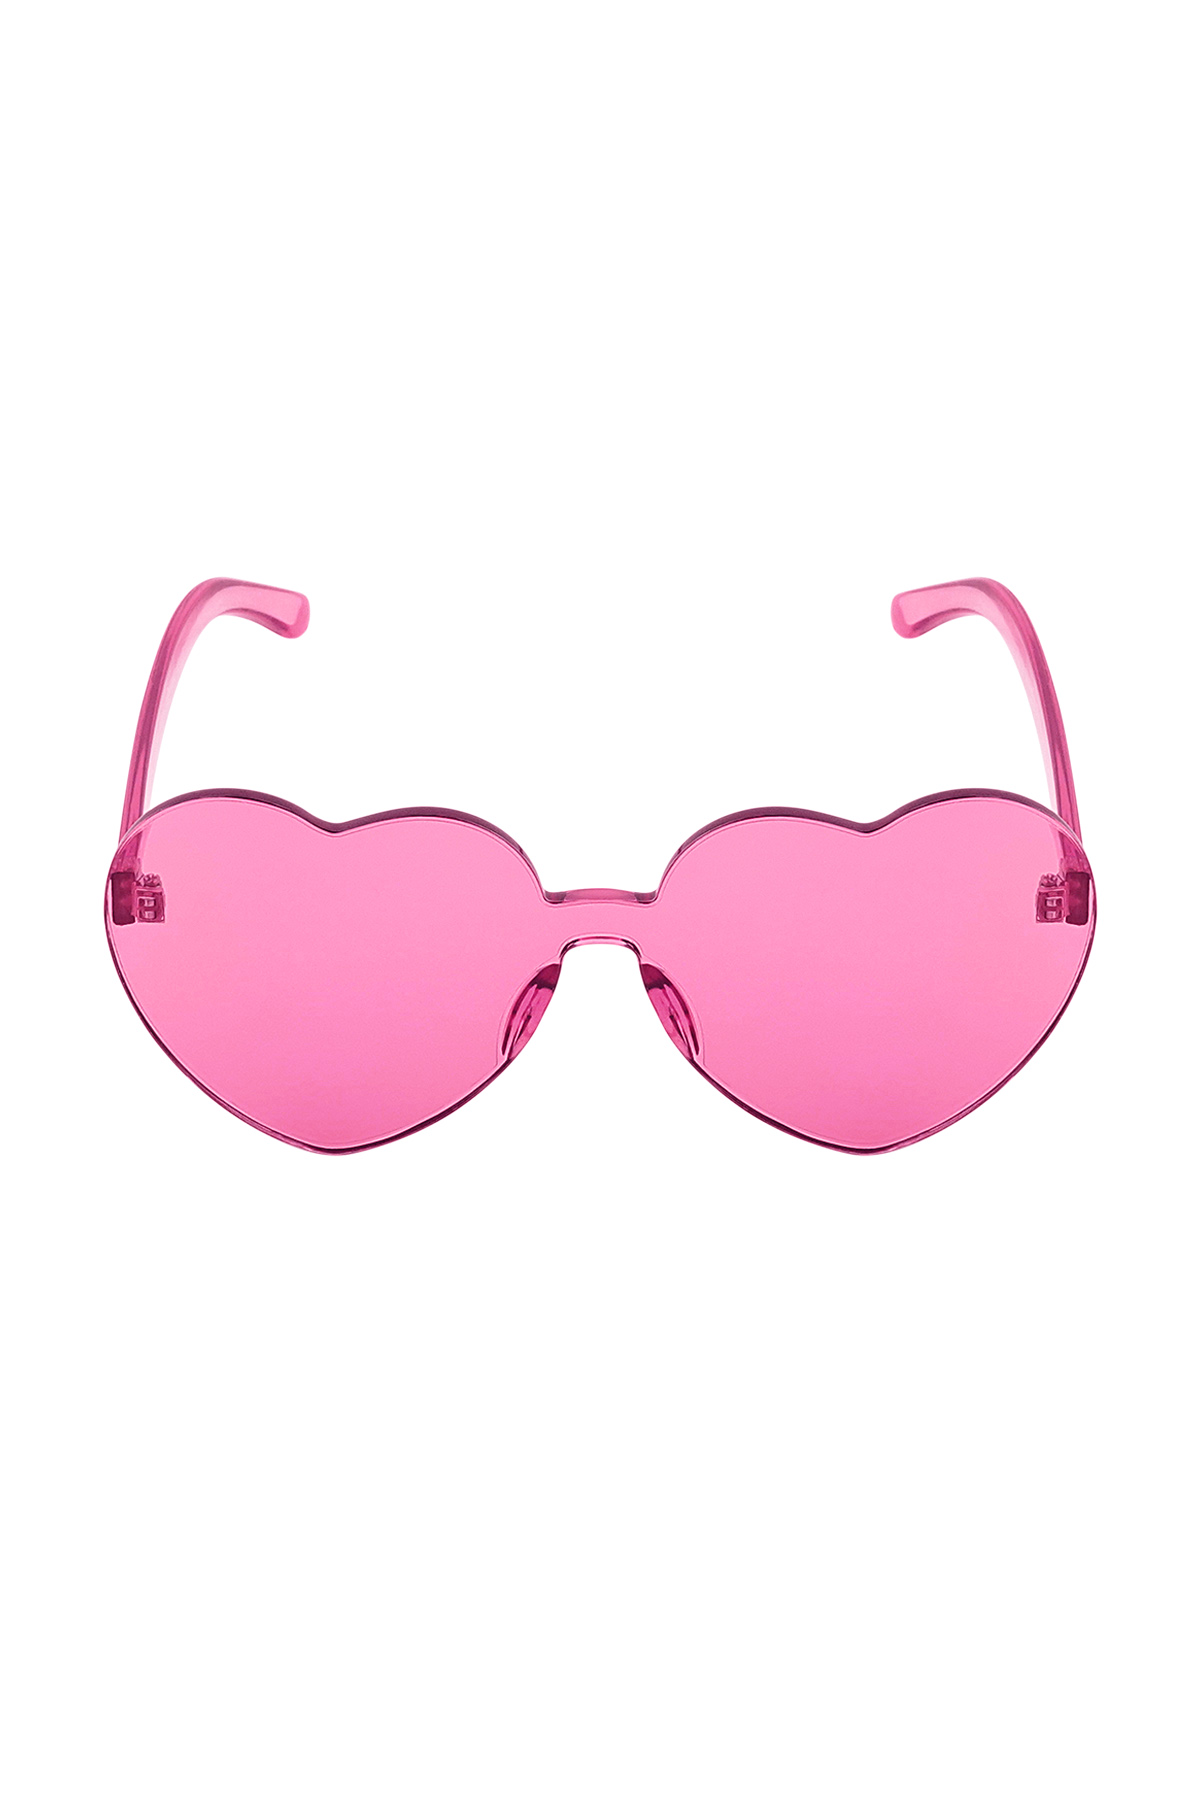 Heart sunglasses - pink  h5 Picture5